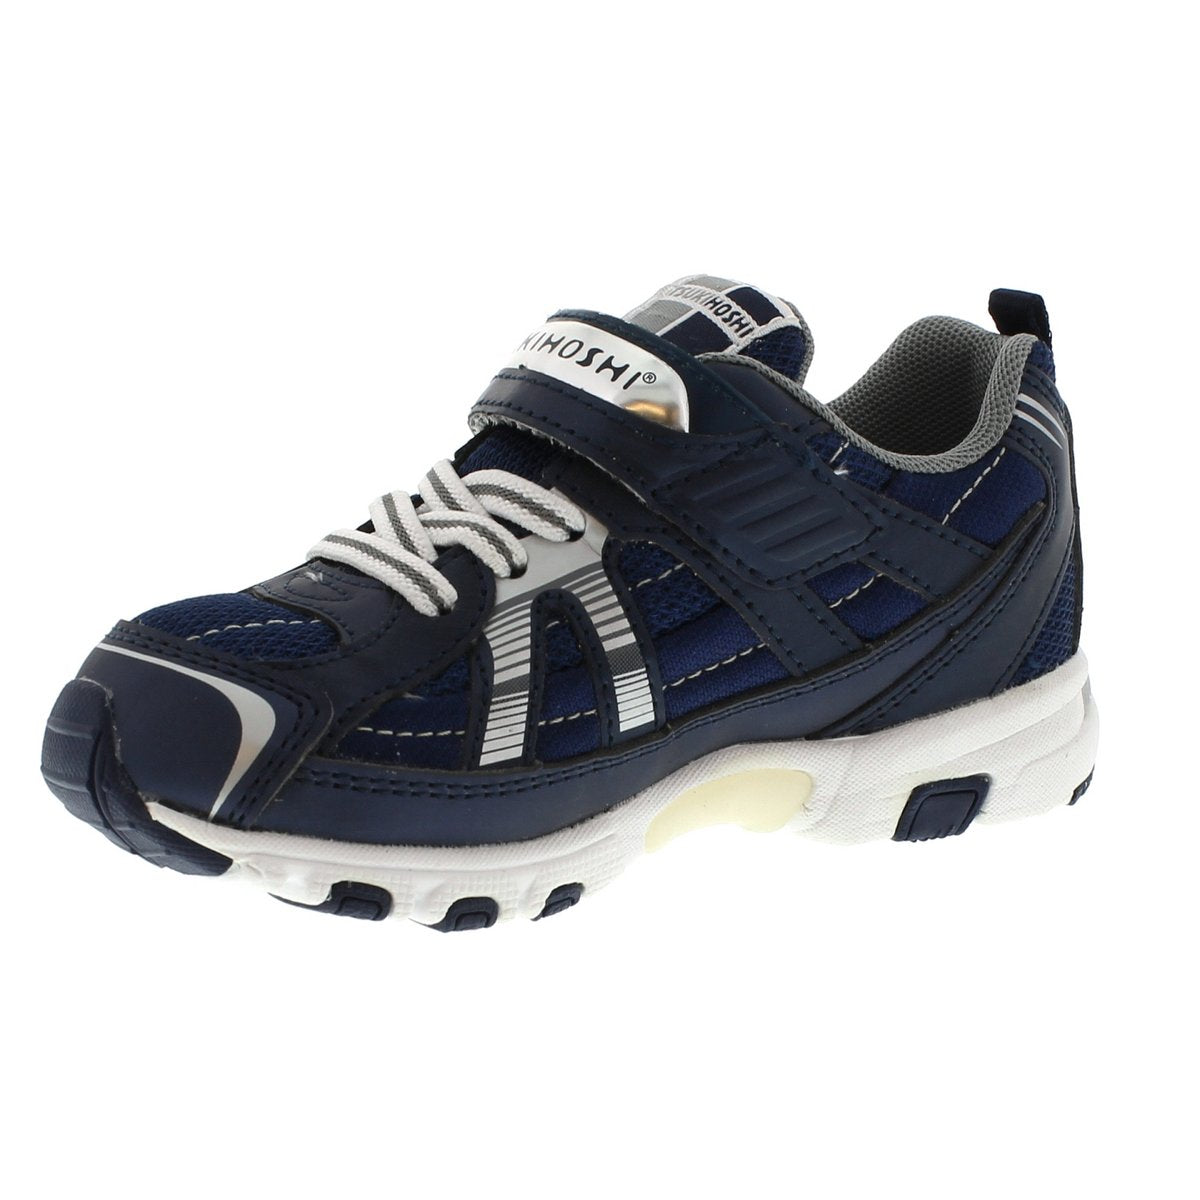 Child Tsukihoshi Storm Sneaker in Navy/Silver from the front view